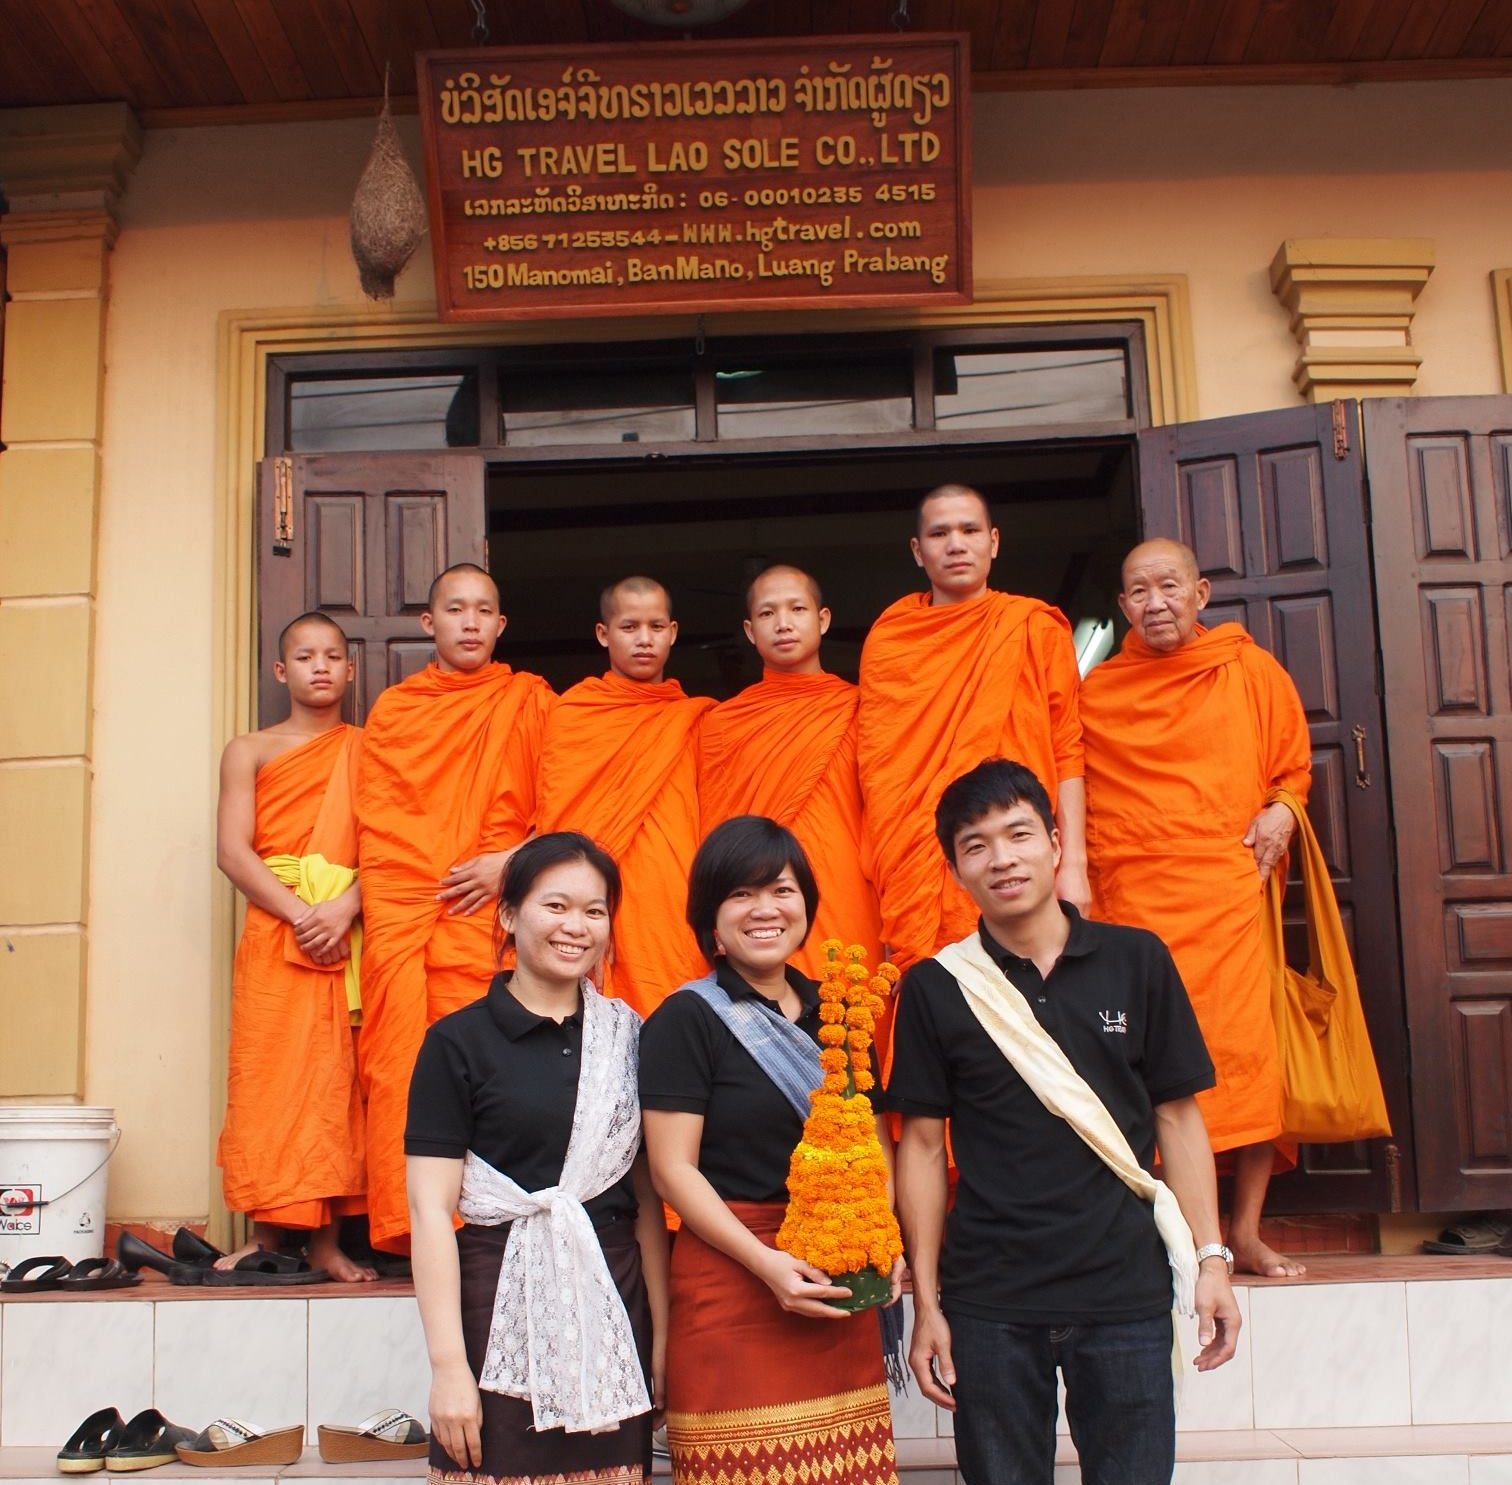 The birth of ASIA DMC in Laos and the opening of a representative office in the UK